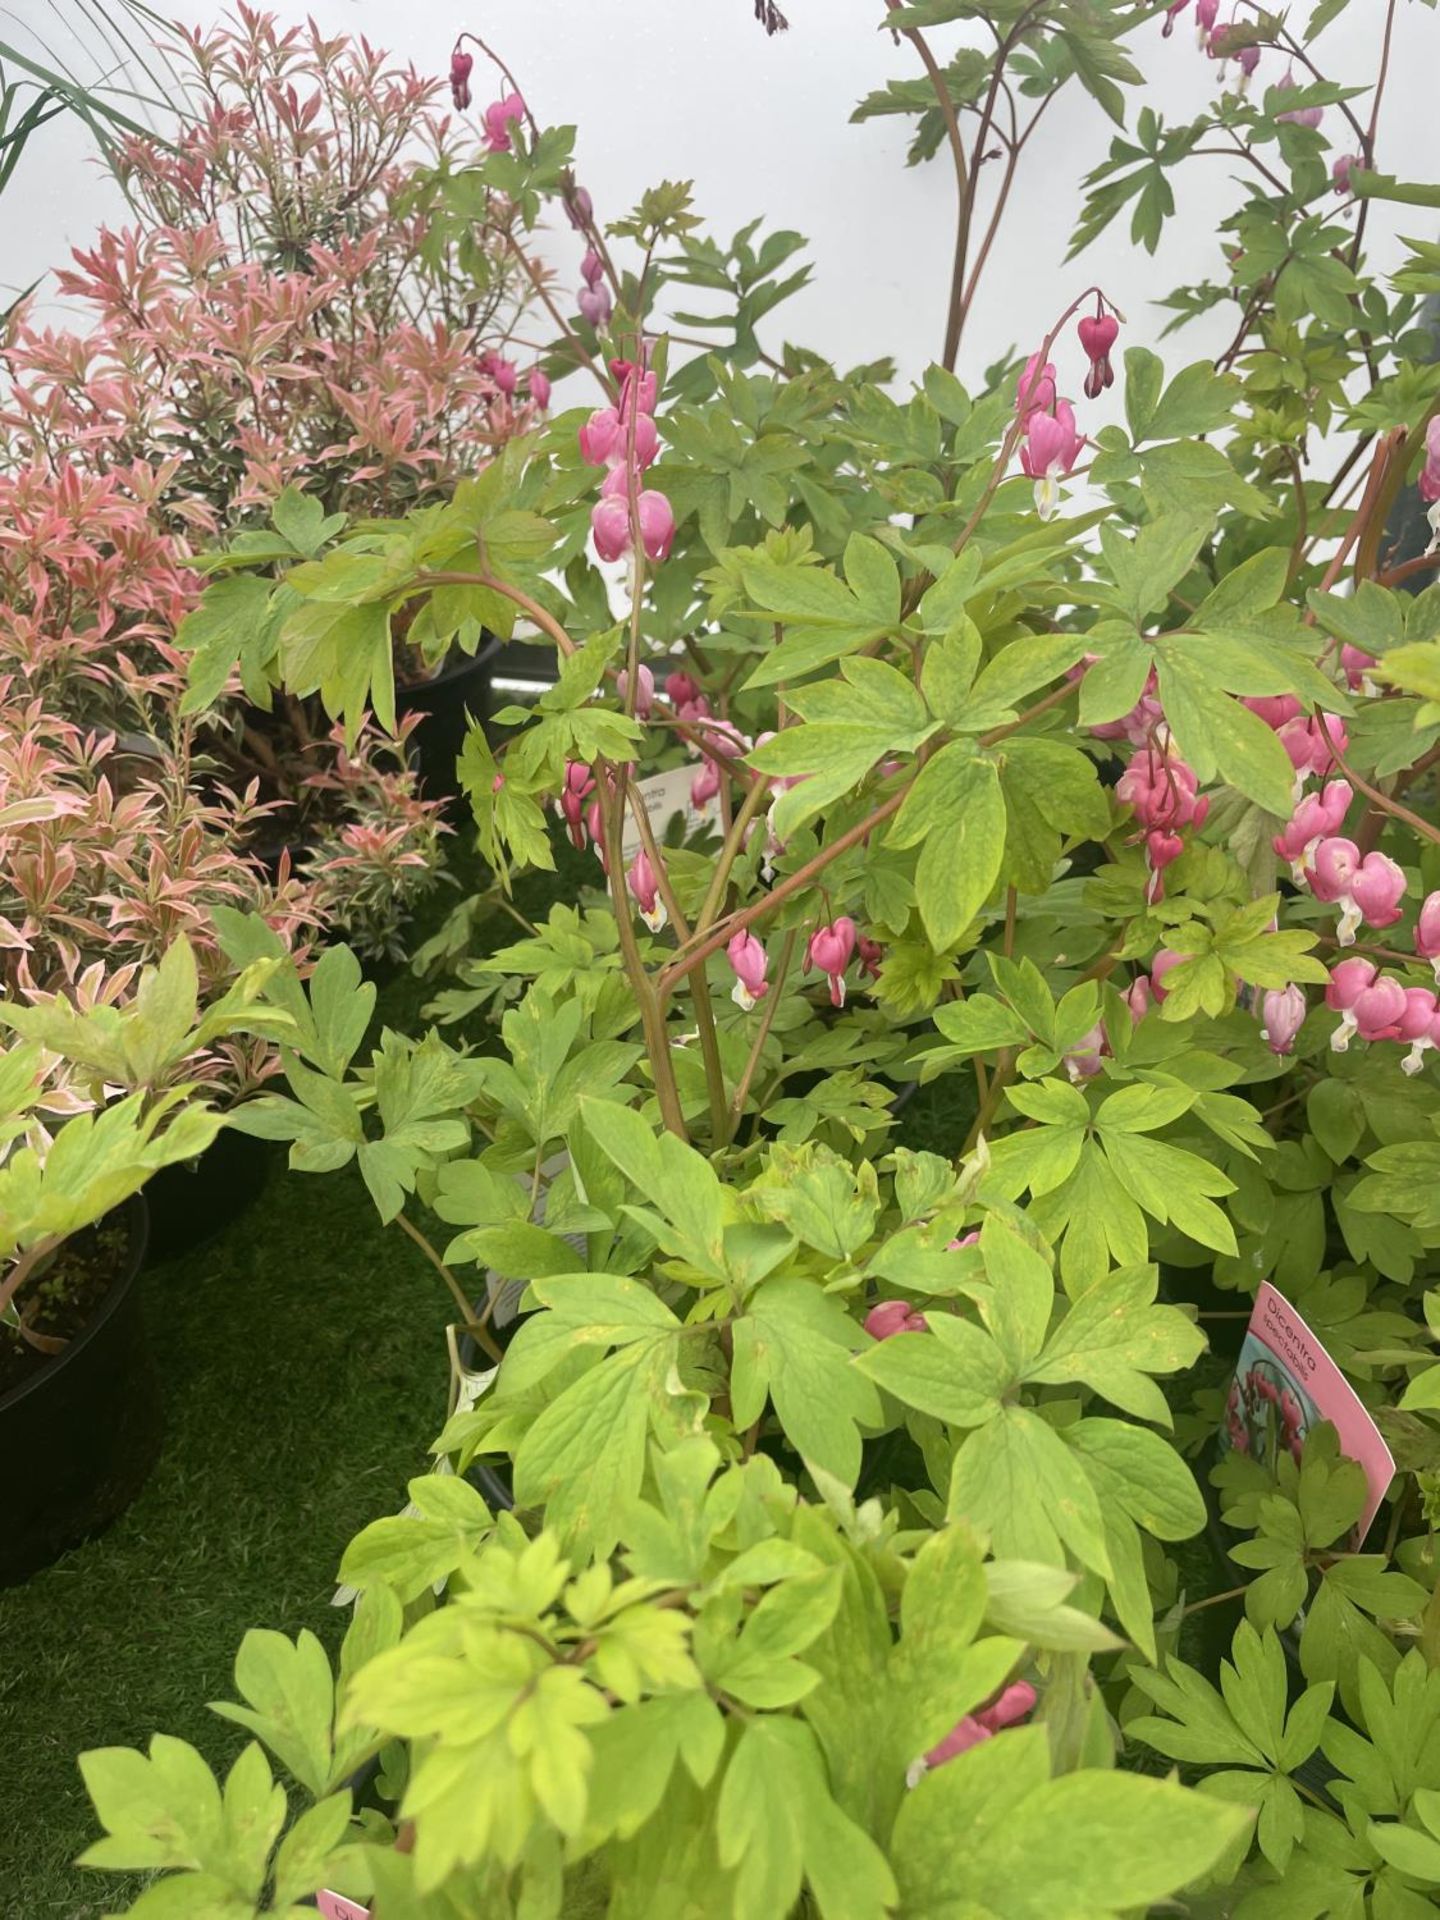 SIX DICENTRA SPECTABILIS BLEEDING HEART 50CM TALL TO BE SOLD FOR THE SIX PLUS VAT - Image 2 of 5